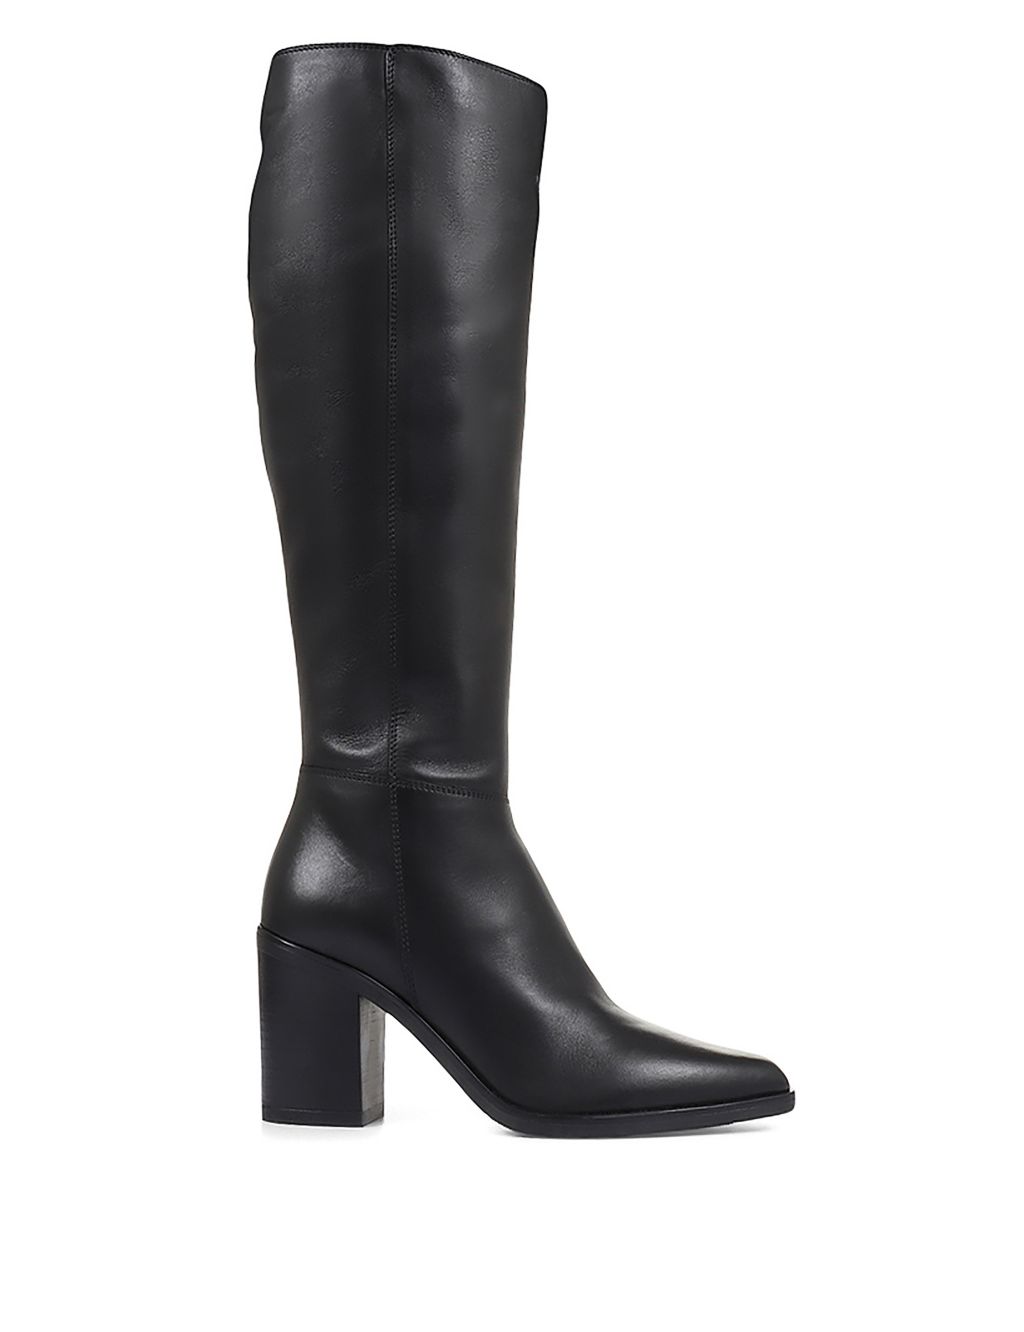 Slim Calf Leather Block Heel Pointed Knee High Boots image 2